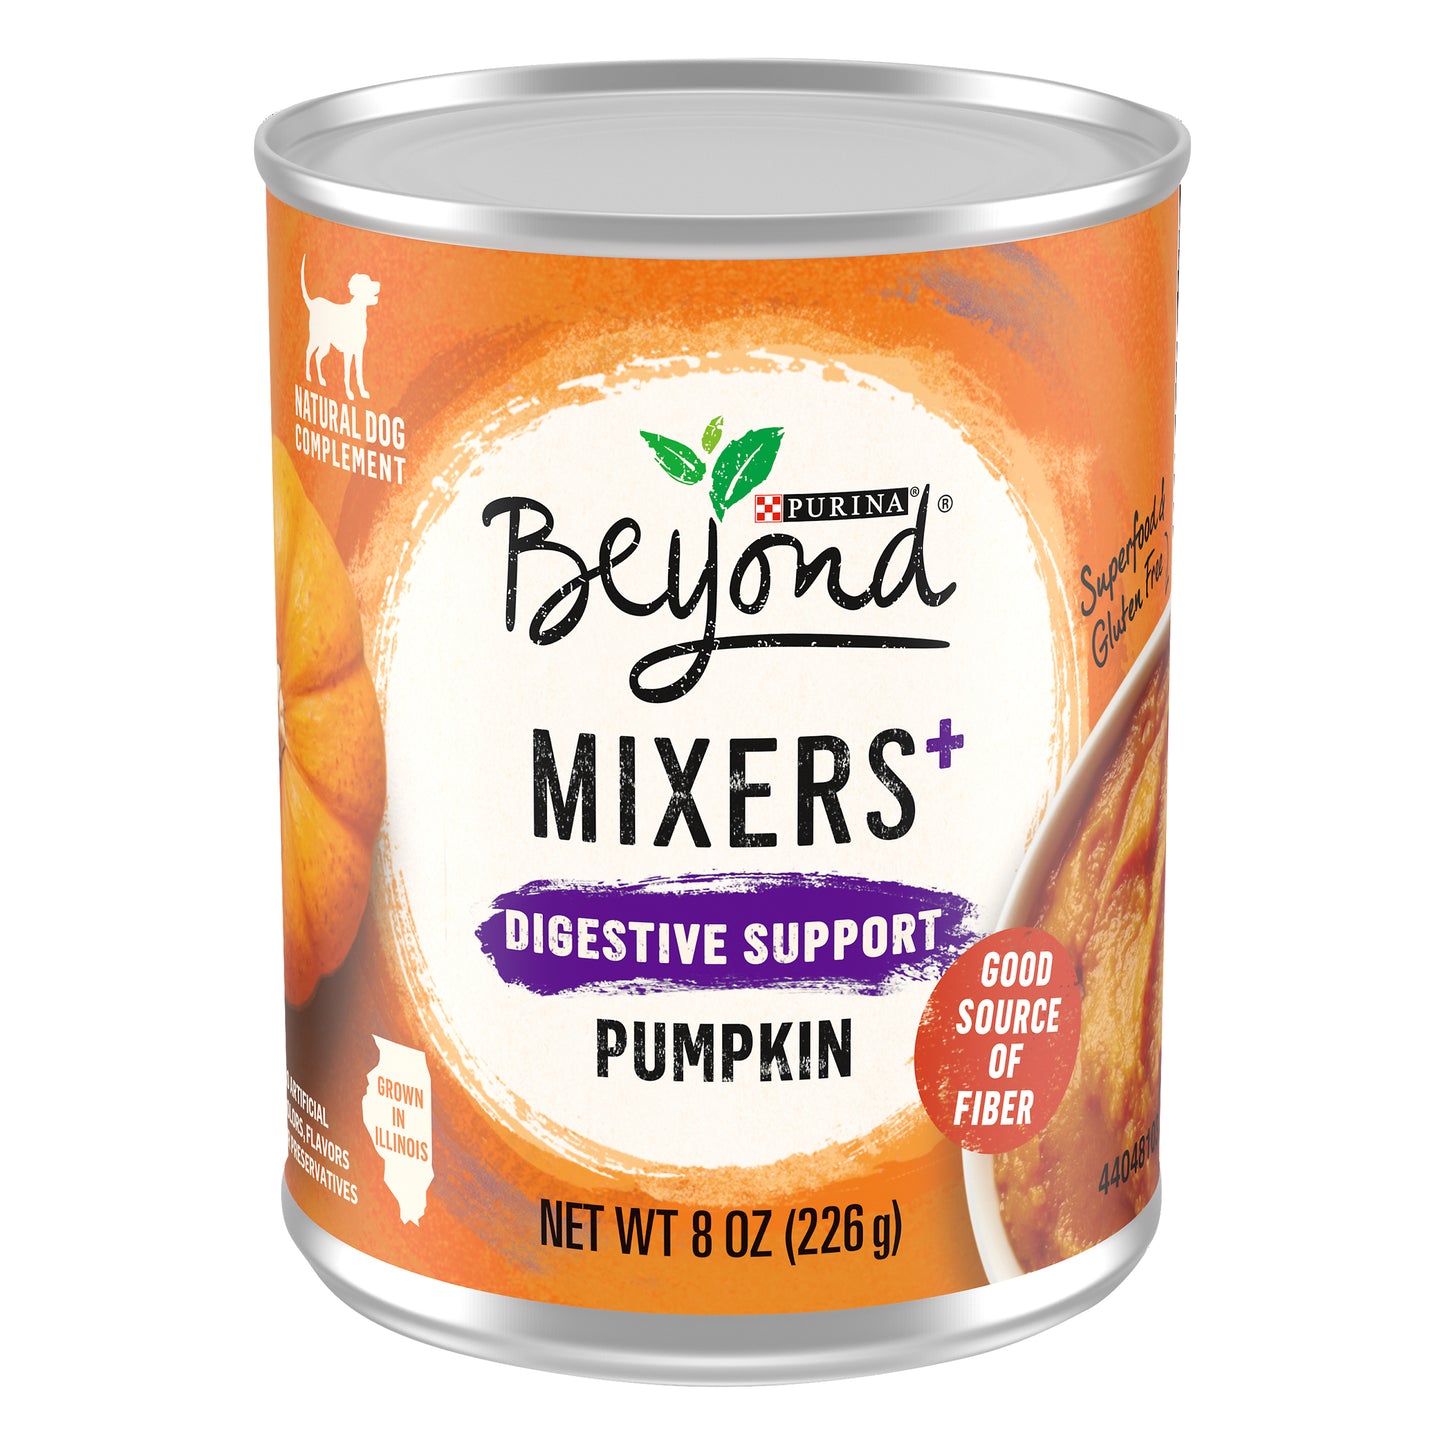 (12 Pack) Purina Beyond Natural, Grain Free, Limited Ingredient Dog Food Complement, Mixers+ Digestive Support Pumpkin, 8 oz. Cans